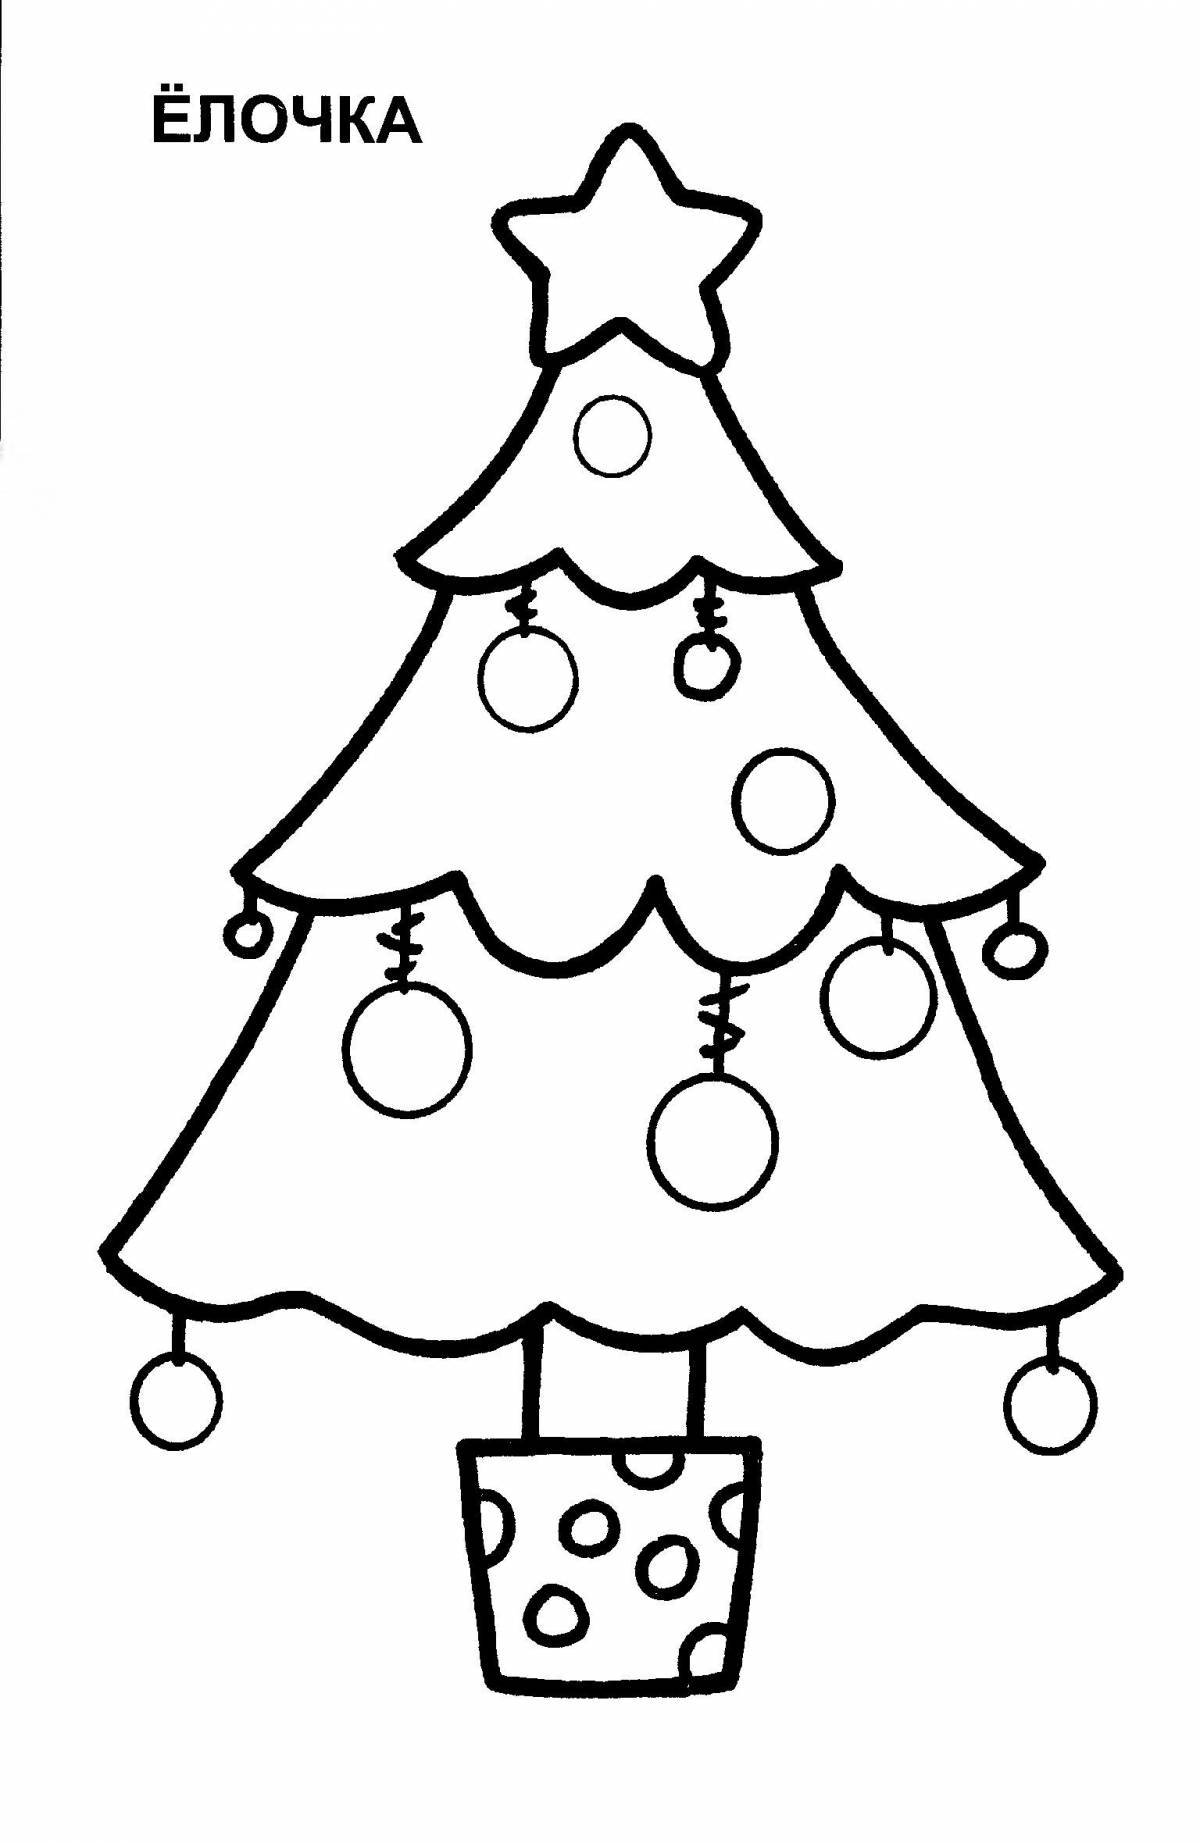 Coloring book exotic Christmas tree for kids 2-3 years old